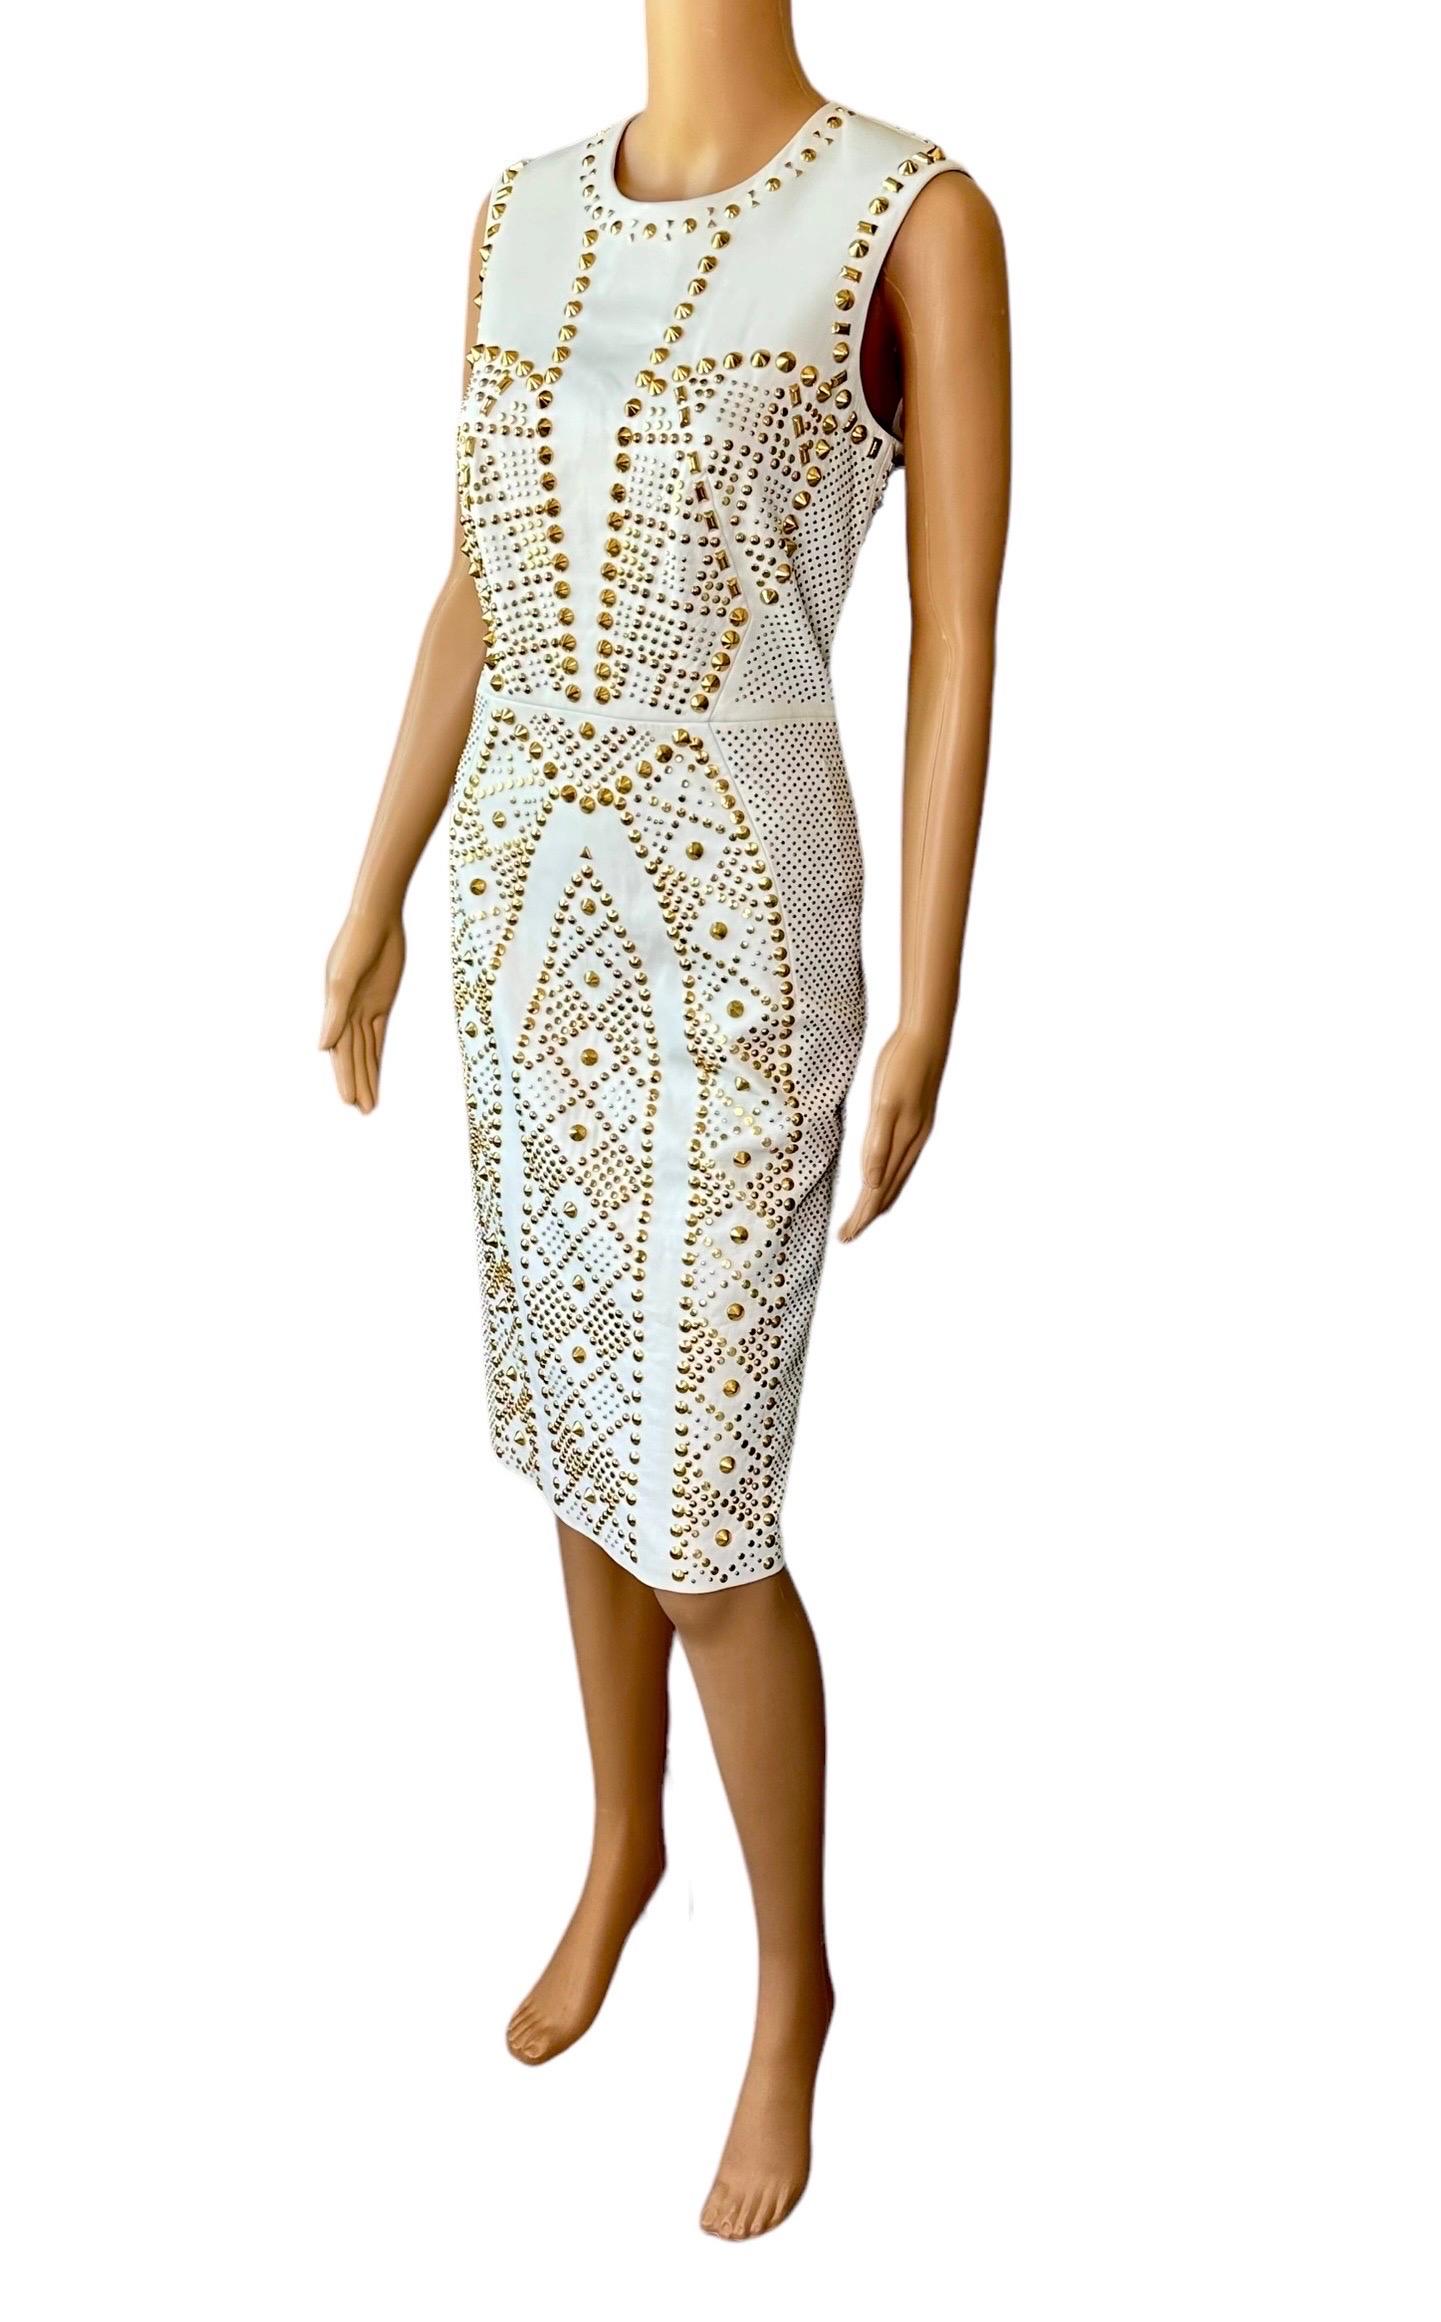 Versace S/S 2012 Runway Embellished Gold Studded Ivory Leather Dress  For Sale 3